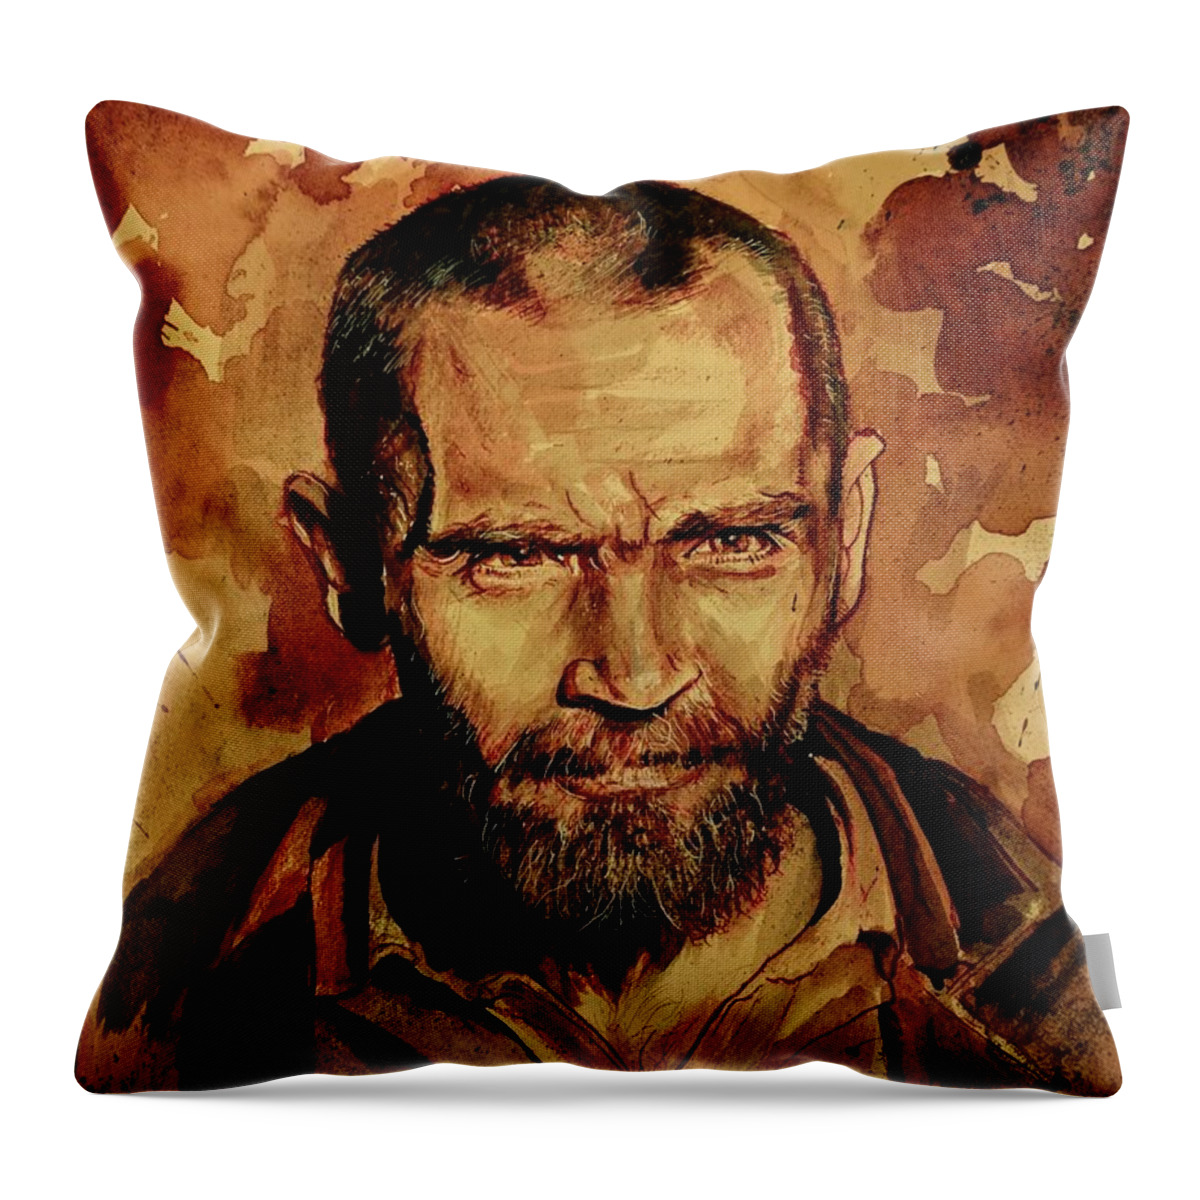 Ryan Almighty Throw Pillow featuring the painting CHARLES MANSON portrait fresh blood by Ryan Almighty